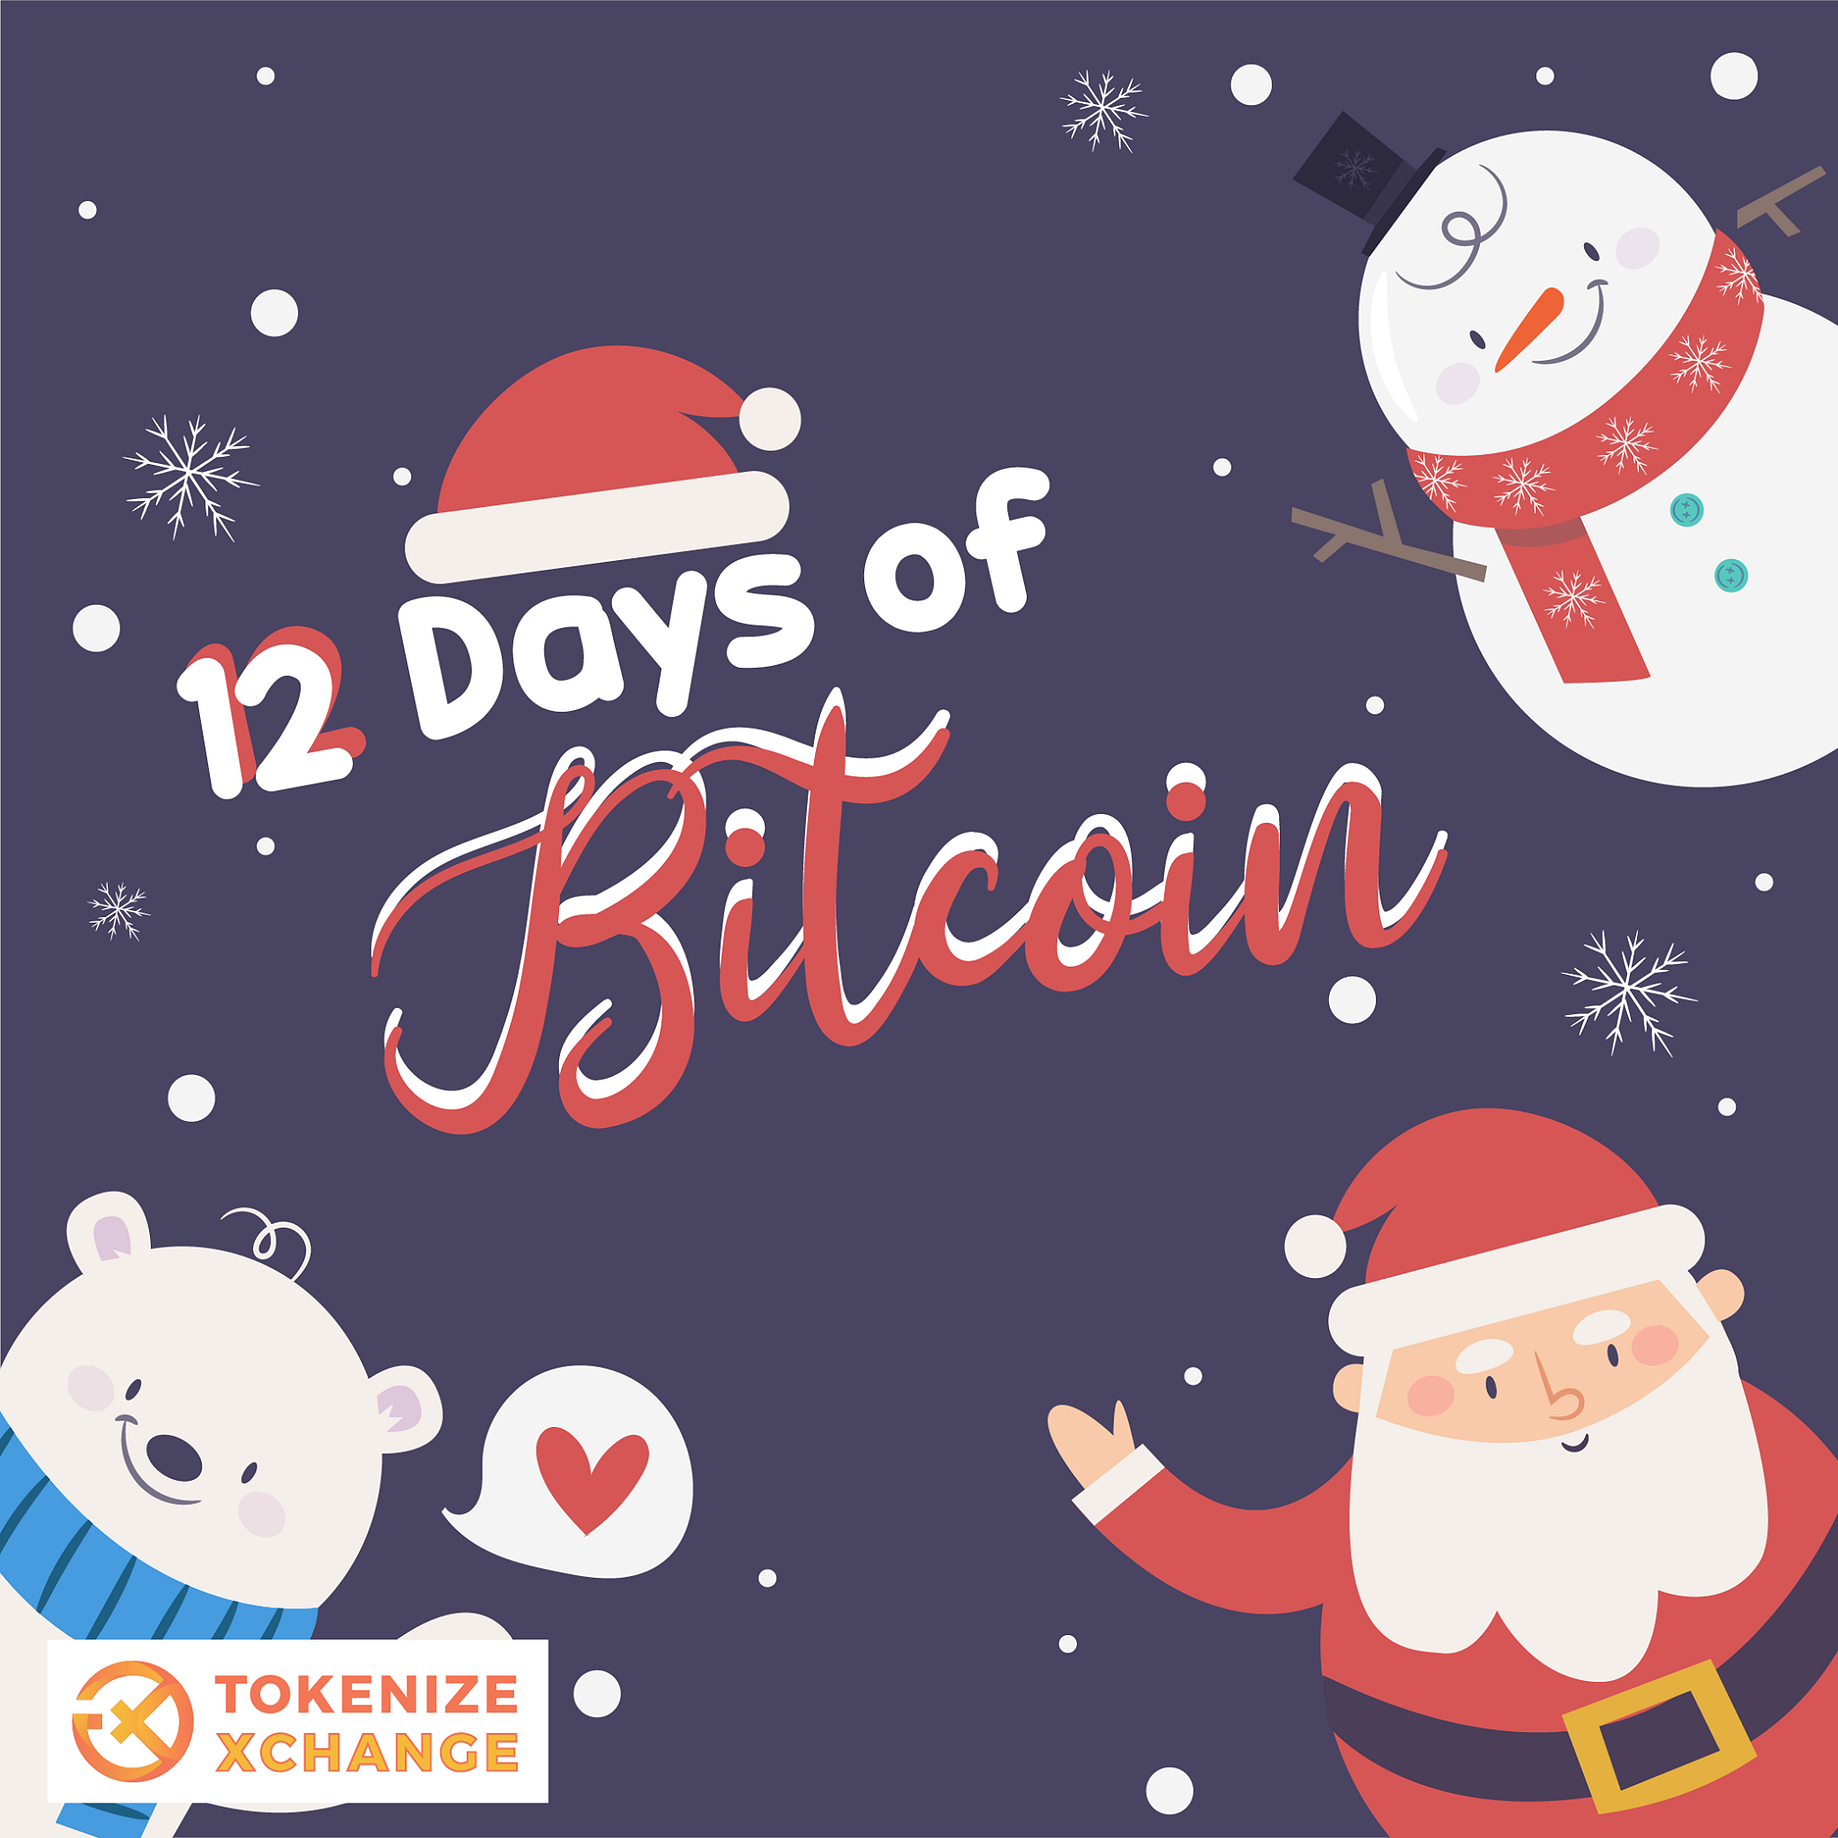 Answers Of 12 Days Of Bitcoin Competition Questions - 